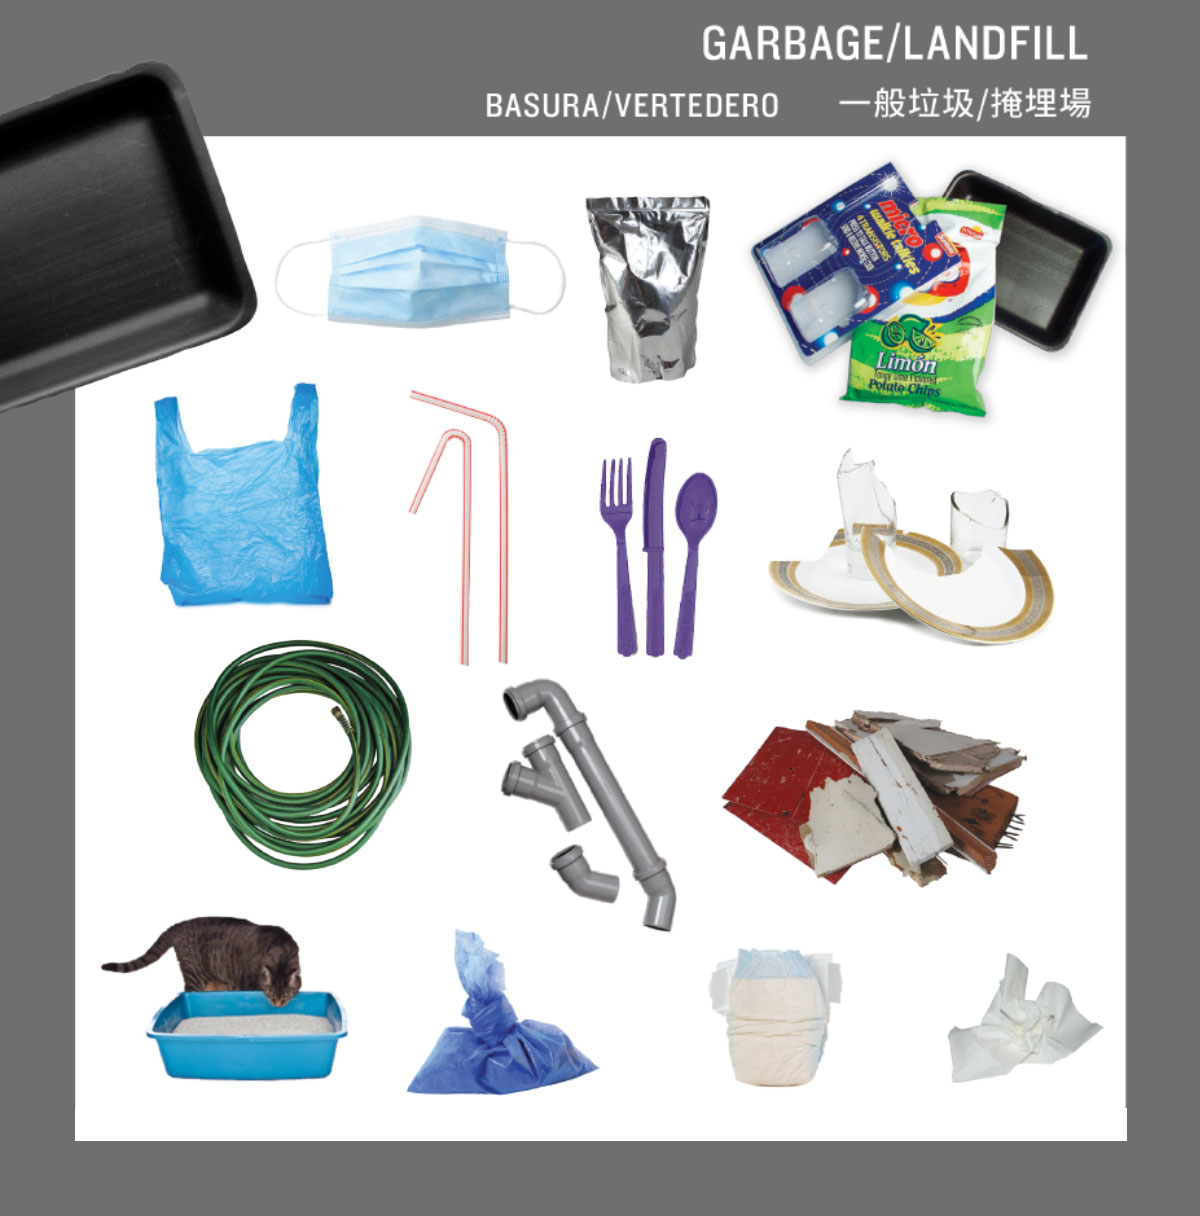 Images of acceptable garbage items: Plastic bags, cutlery, straws, hoses, pet waste, wrappers, broken plates, napkins etc.